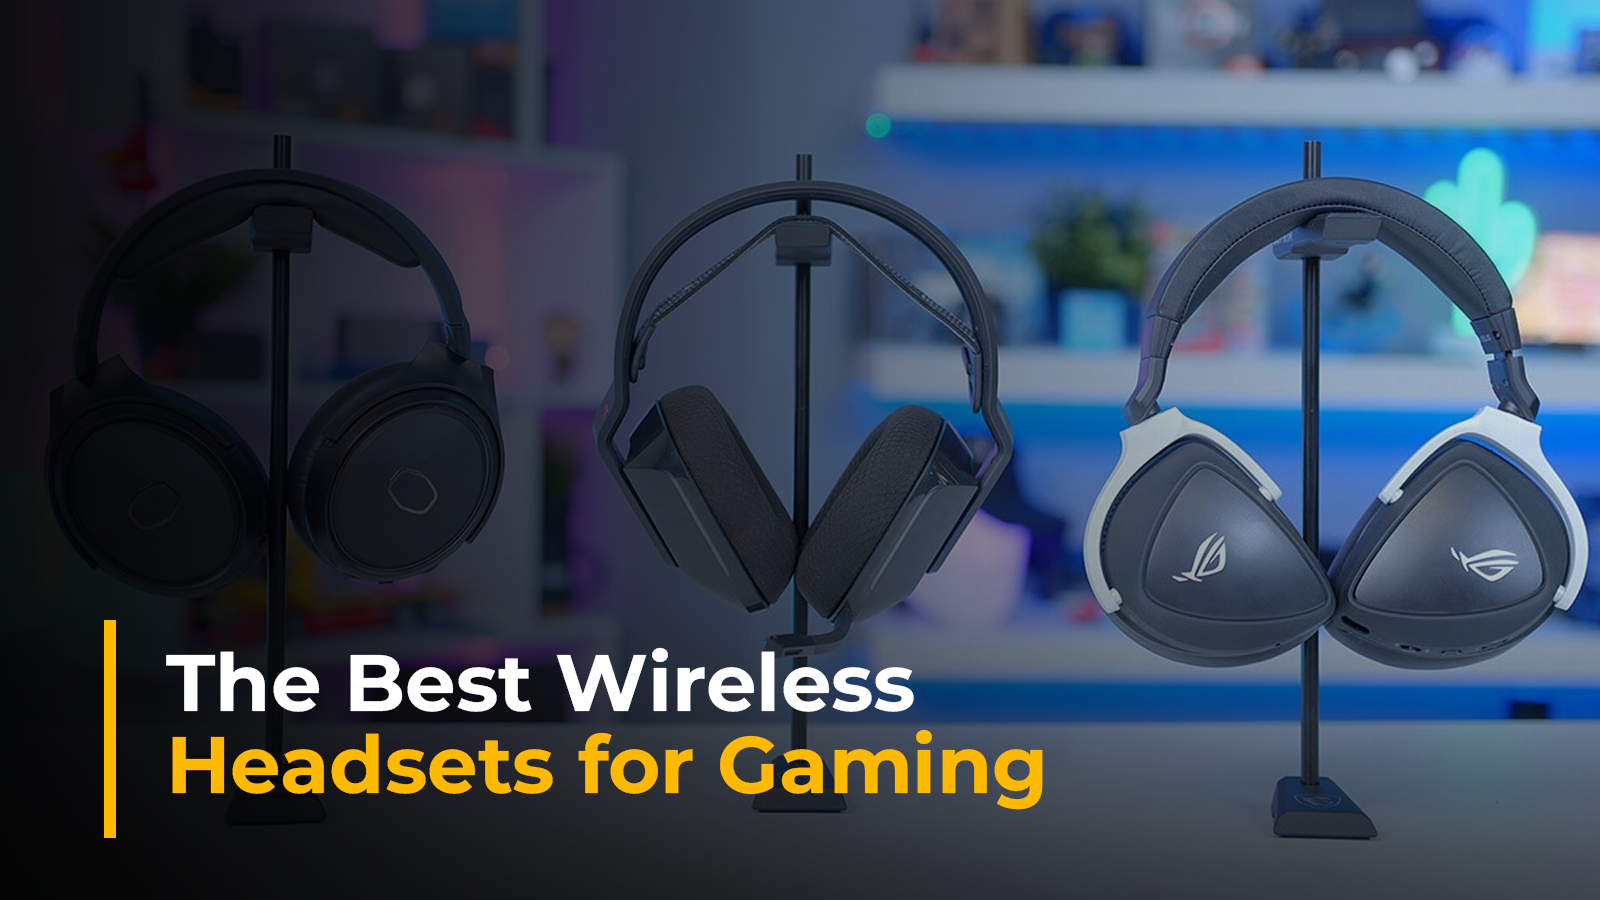 Top 5 Wireless Headsets for Immersive Gaming: Gaming Gear